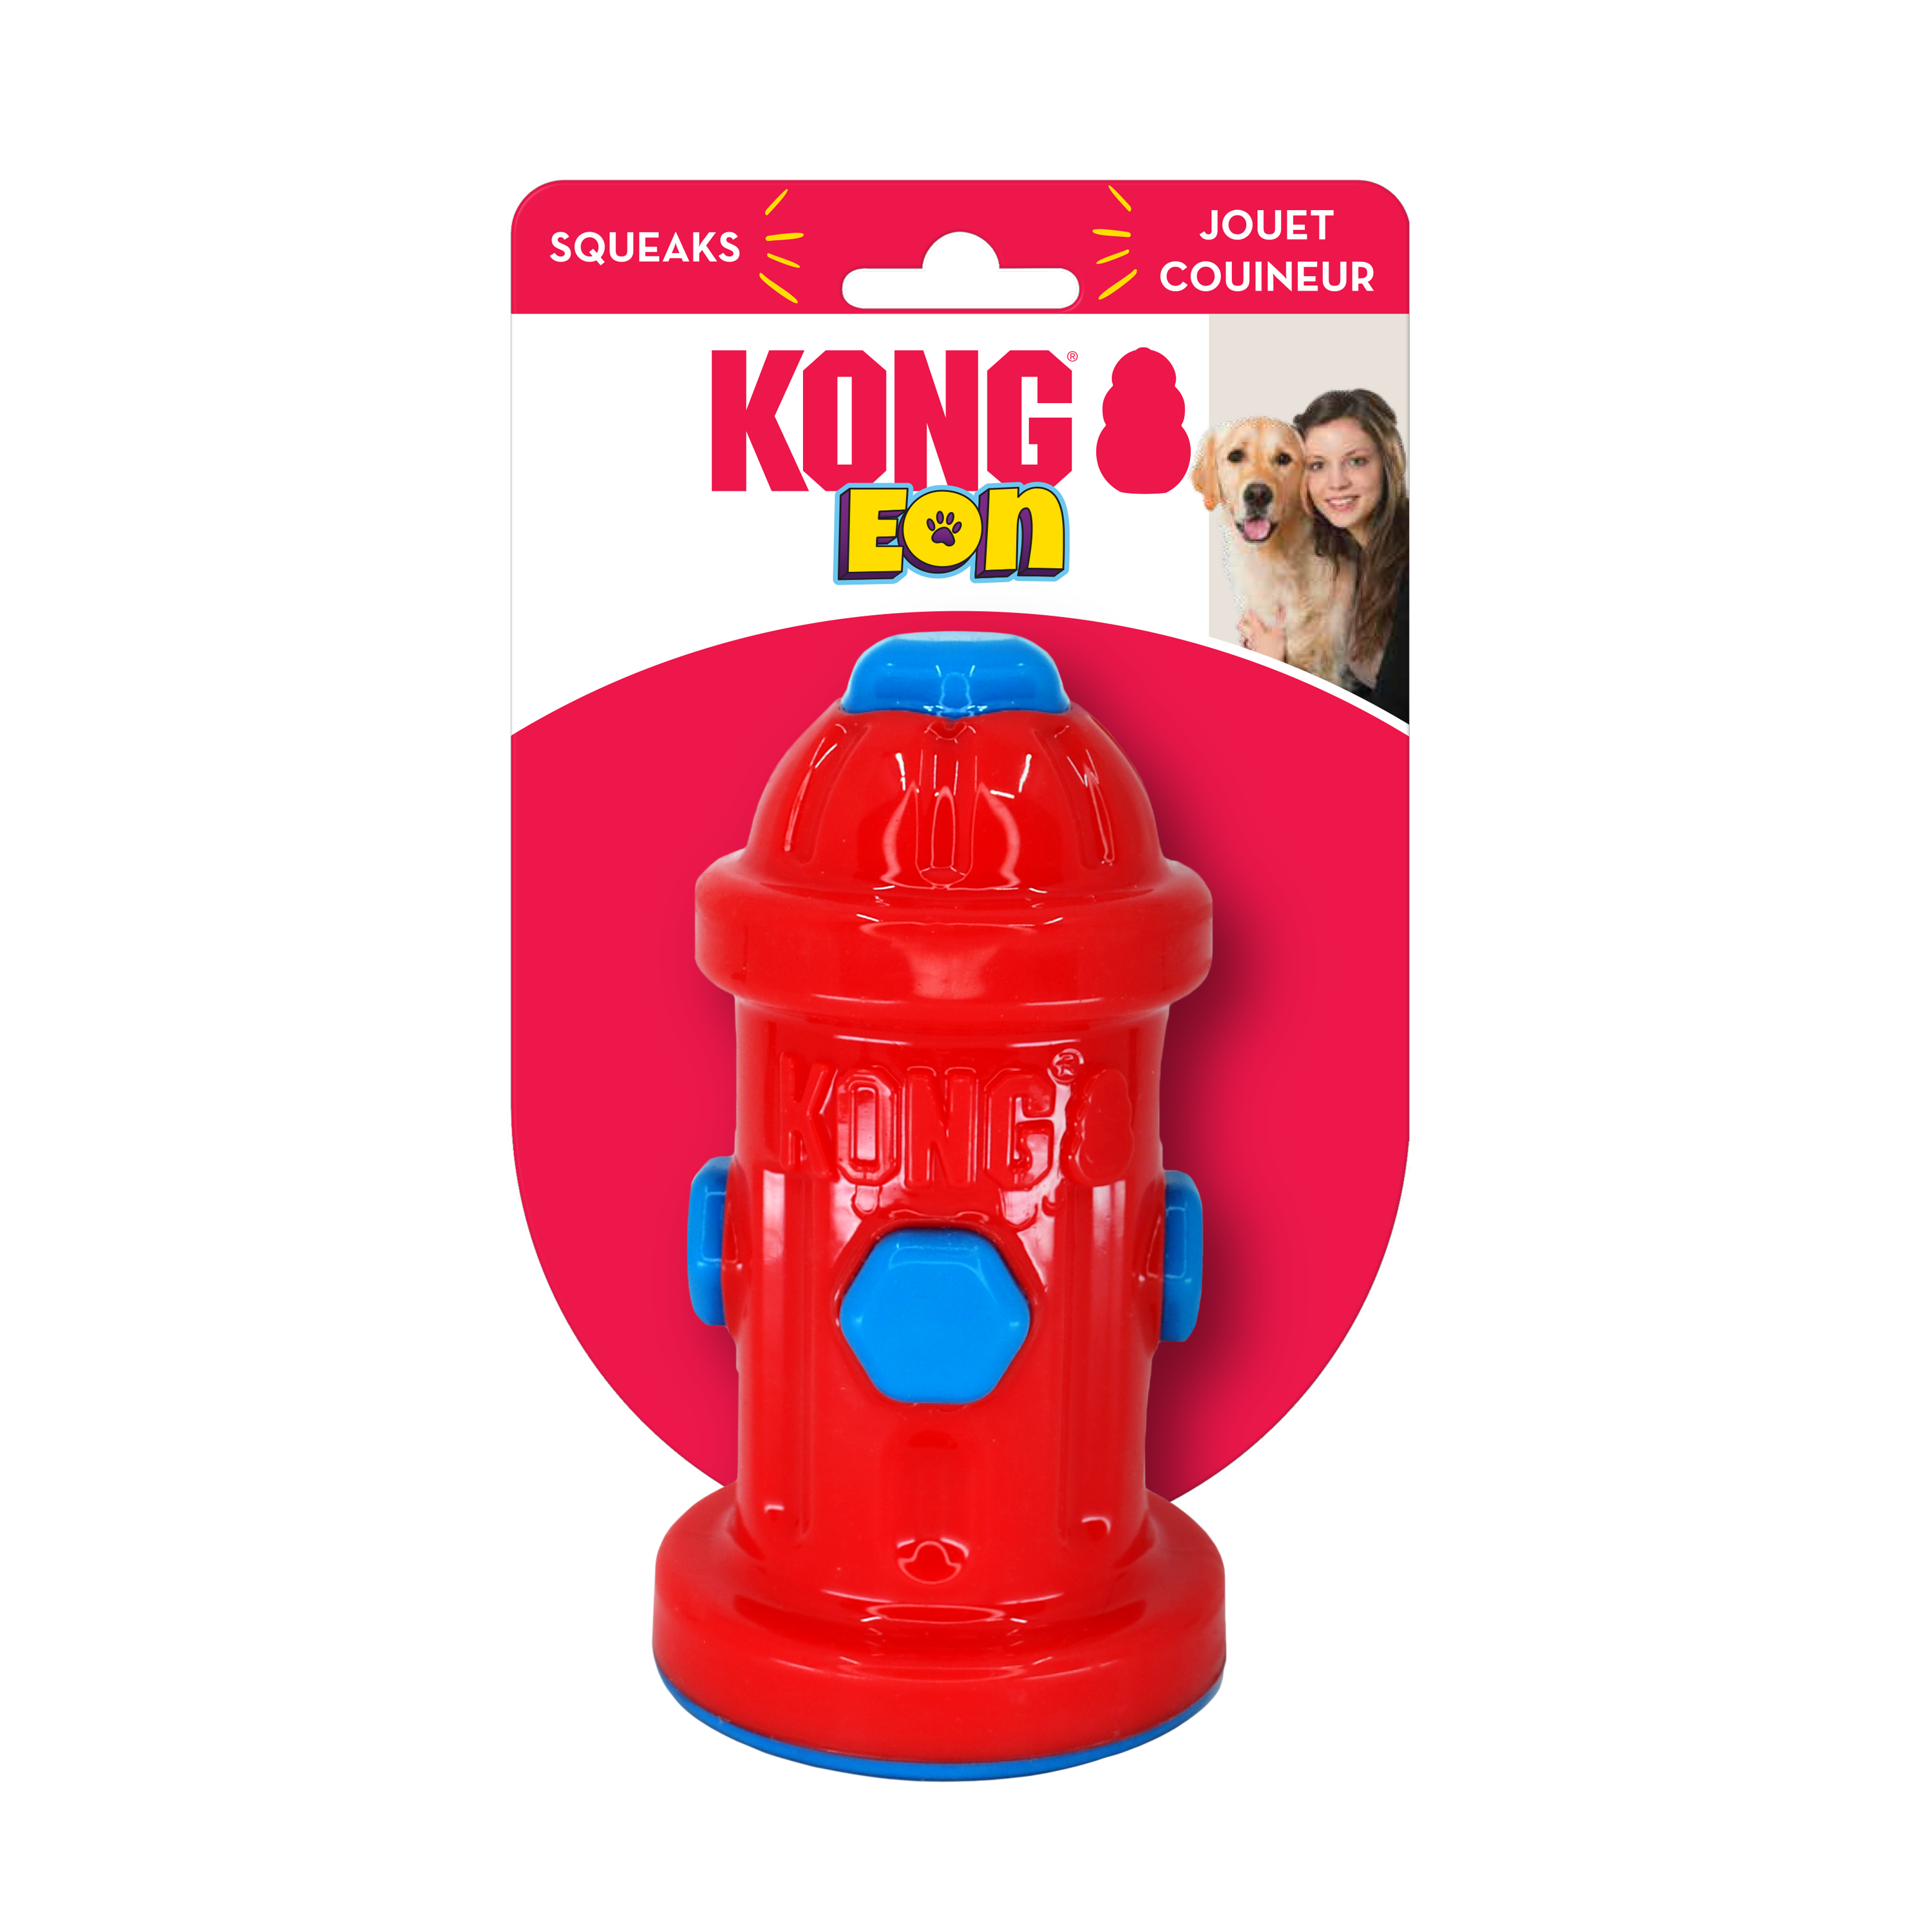 Eon Fire Hydrant onpack product image